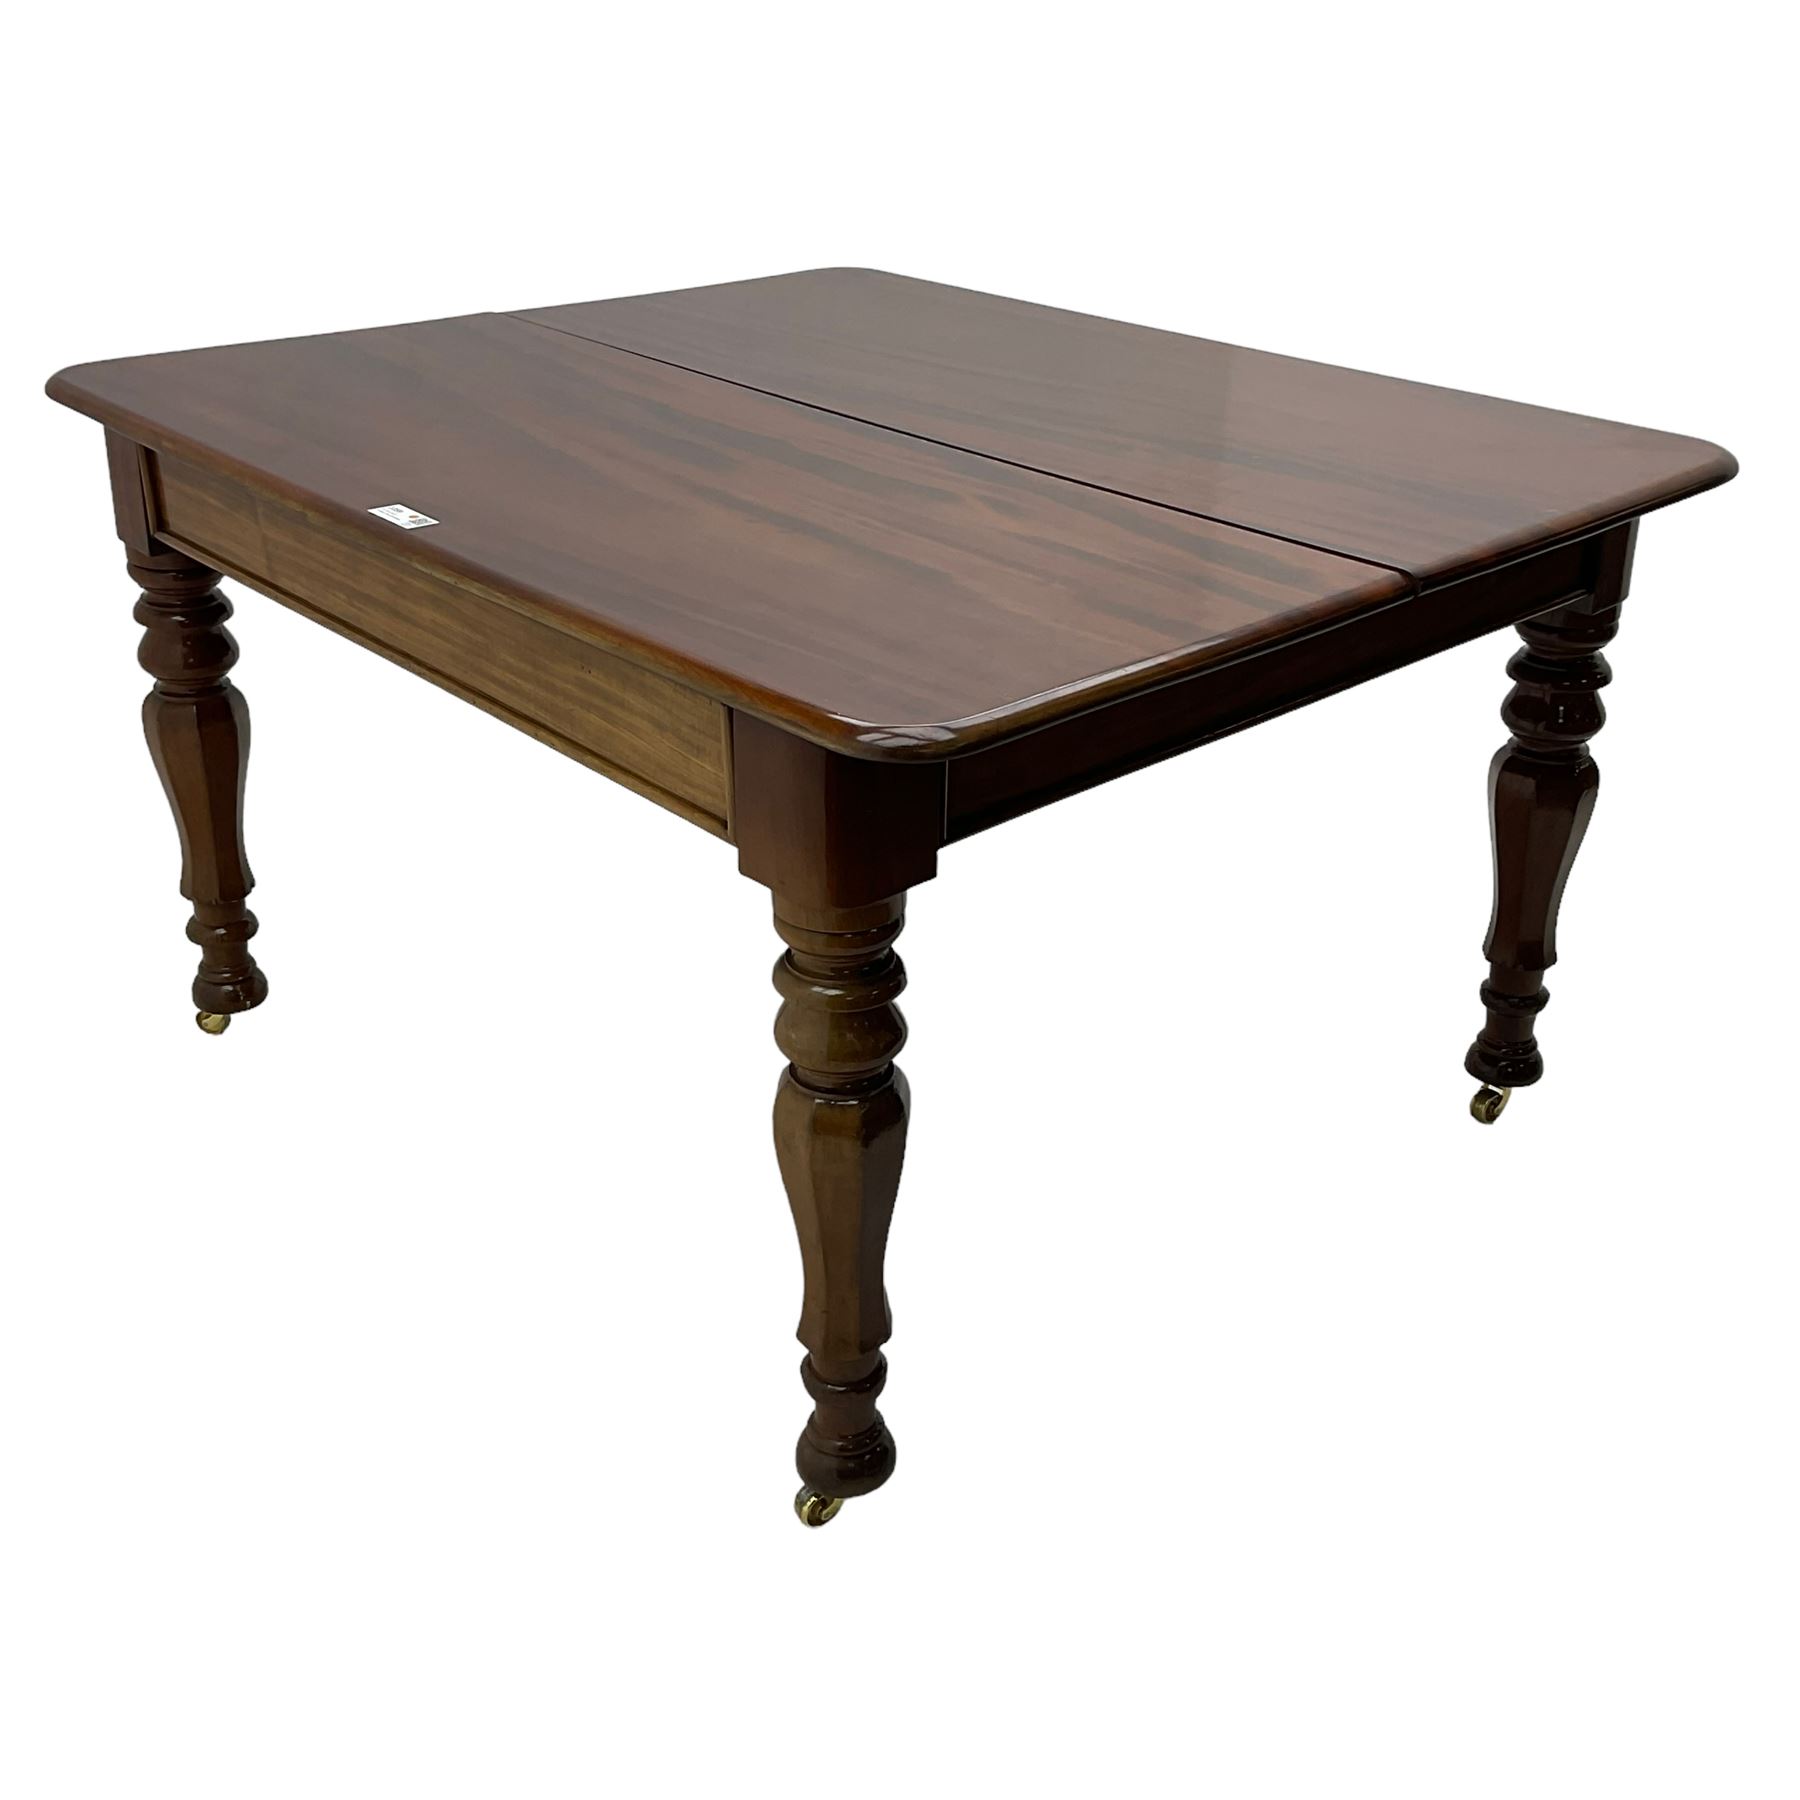 19th century mahogany extending dining table with three additional leaves - Image 6 of 15